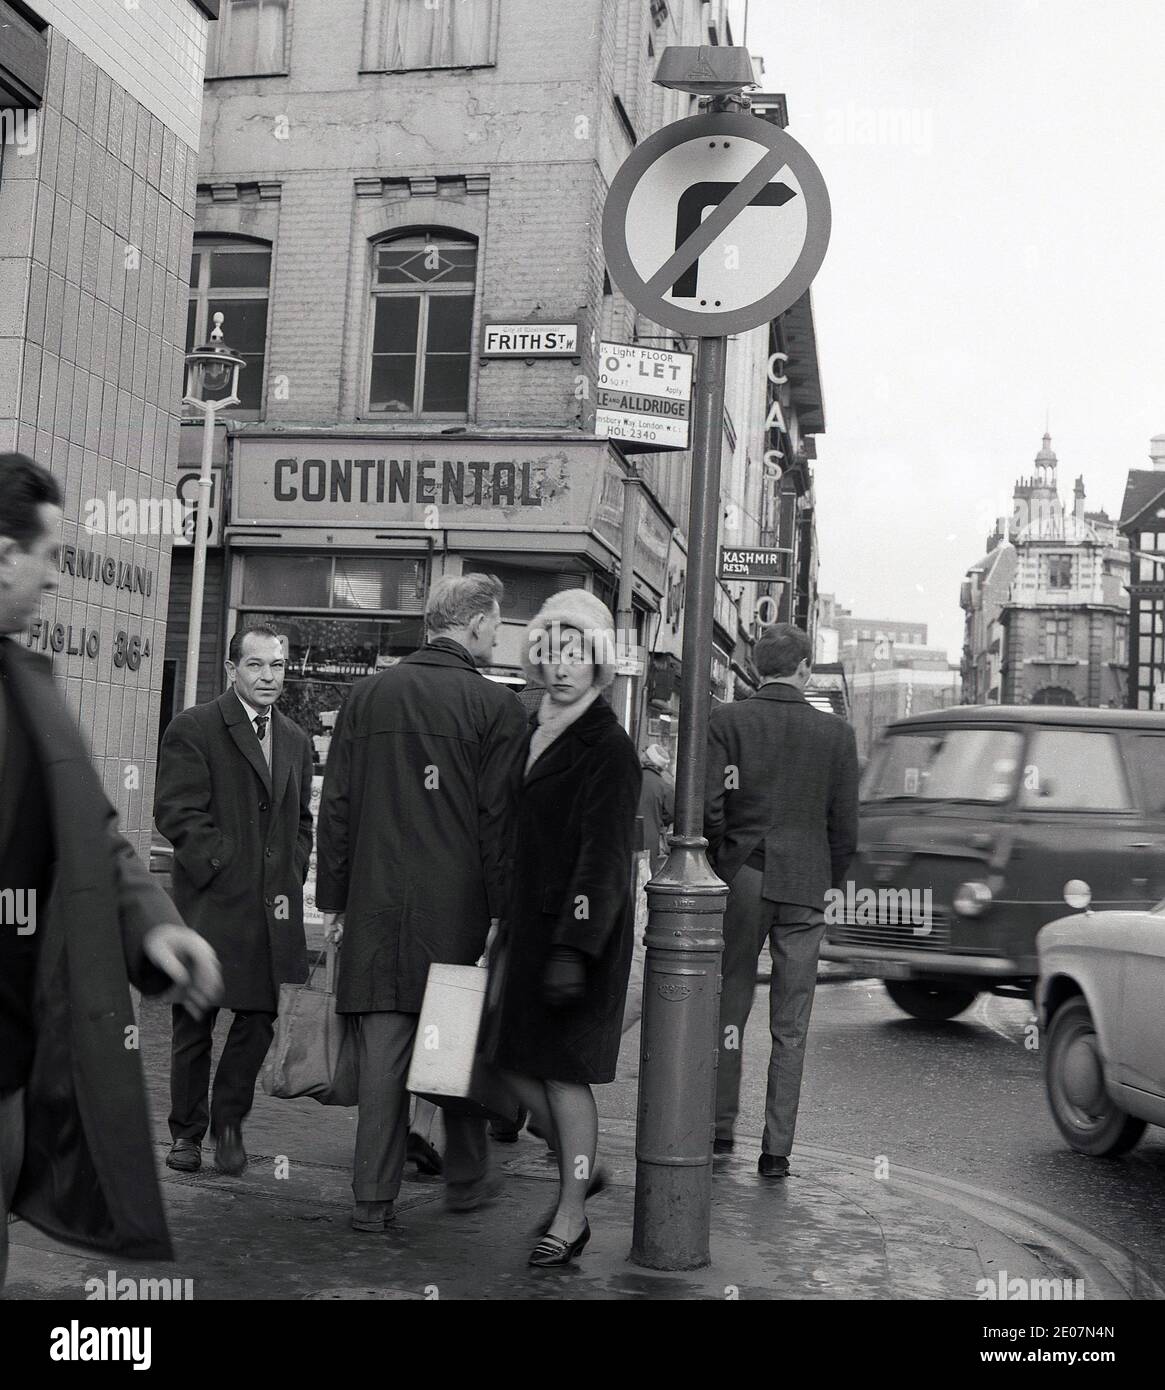 1960s, historical, view of the corner of Frith Street and Old Compton Street, London from this era, showing the fading sign of the 'Continental' stores, passers-by and traffic. In this era, next to the Continental Stores was Angelucci's coffee stores and so Frith St in London's famous Soho area was - and still is - commonly known as 'Little Italy' due to the many Italian cafes and stores along the street. Stock Photo